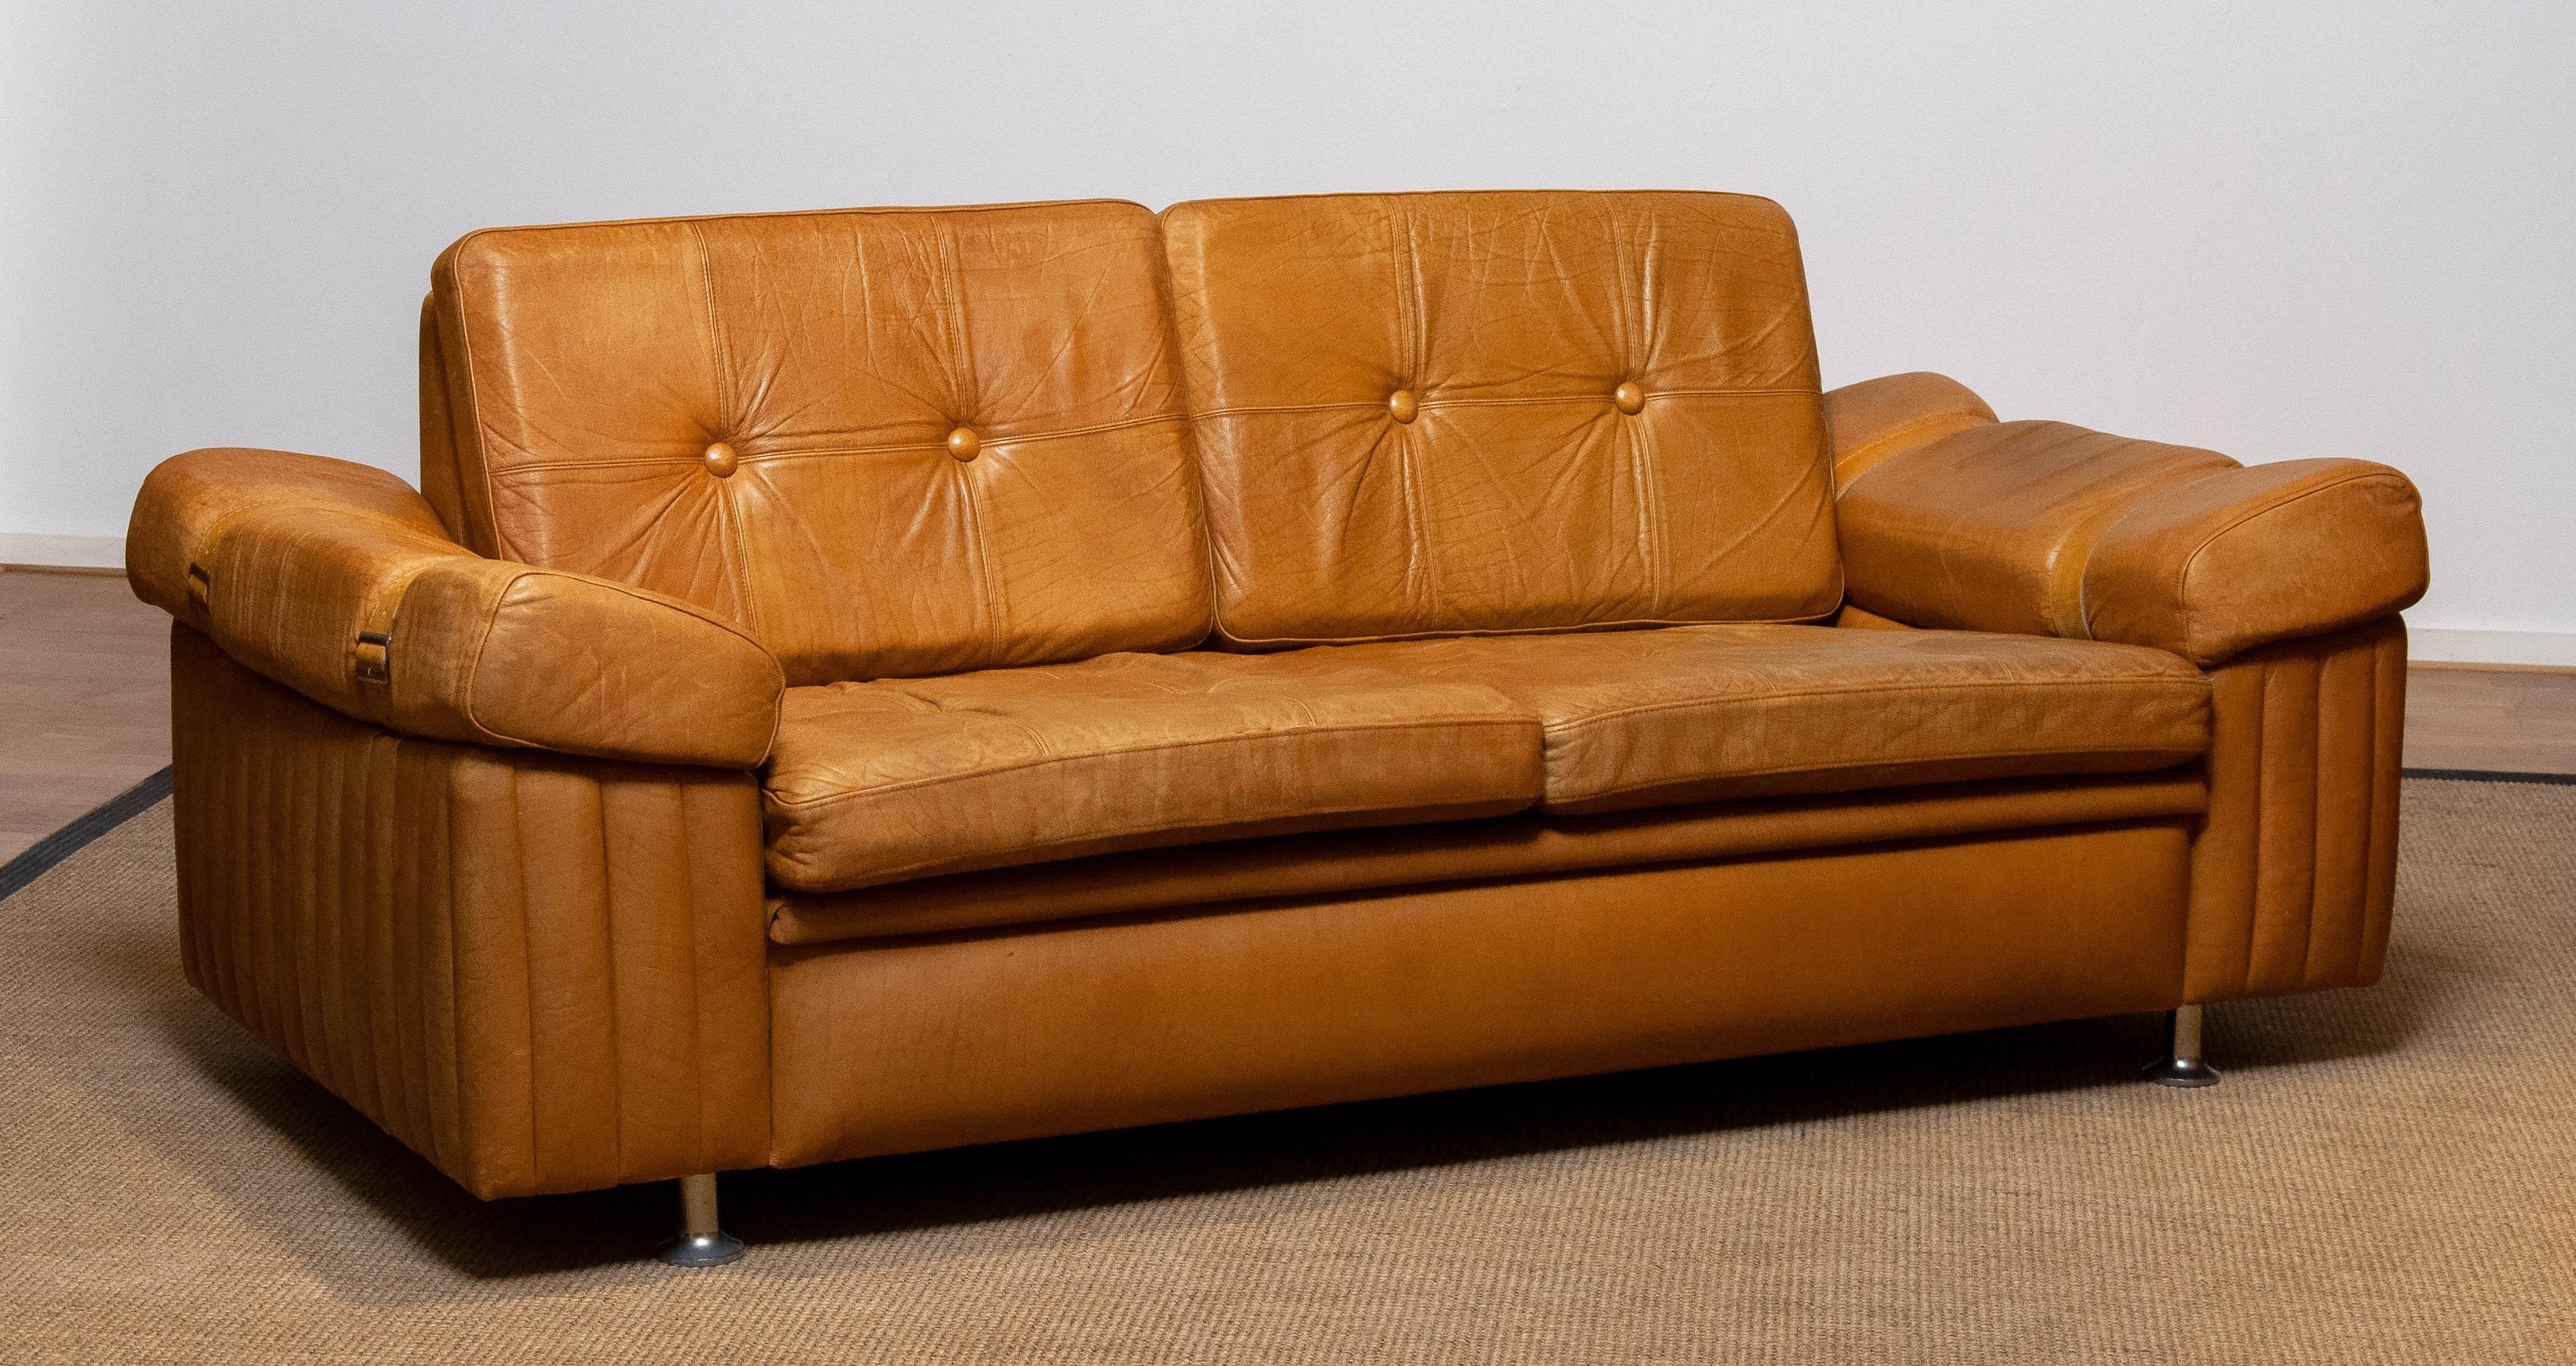 1970s Scandinavian Brutalist Two-Seater Low-Back Sofa in Camel Colored Leather For Sale 4